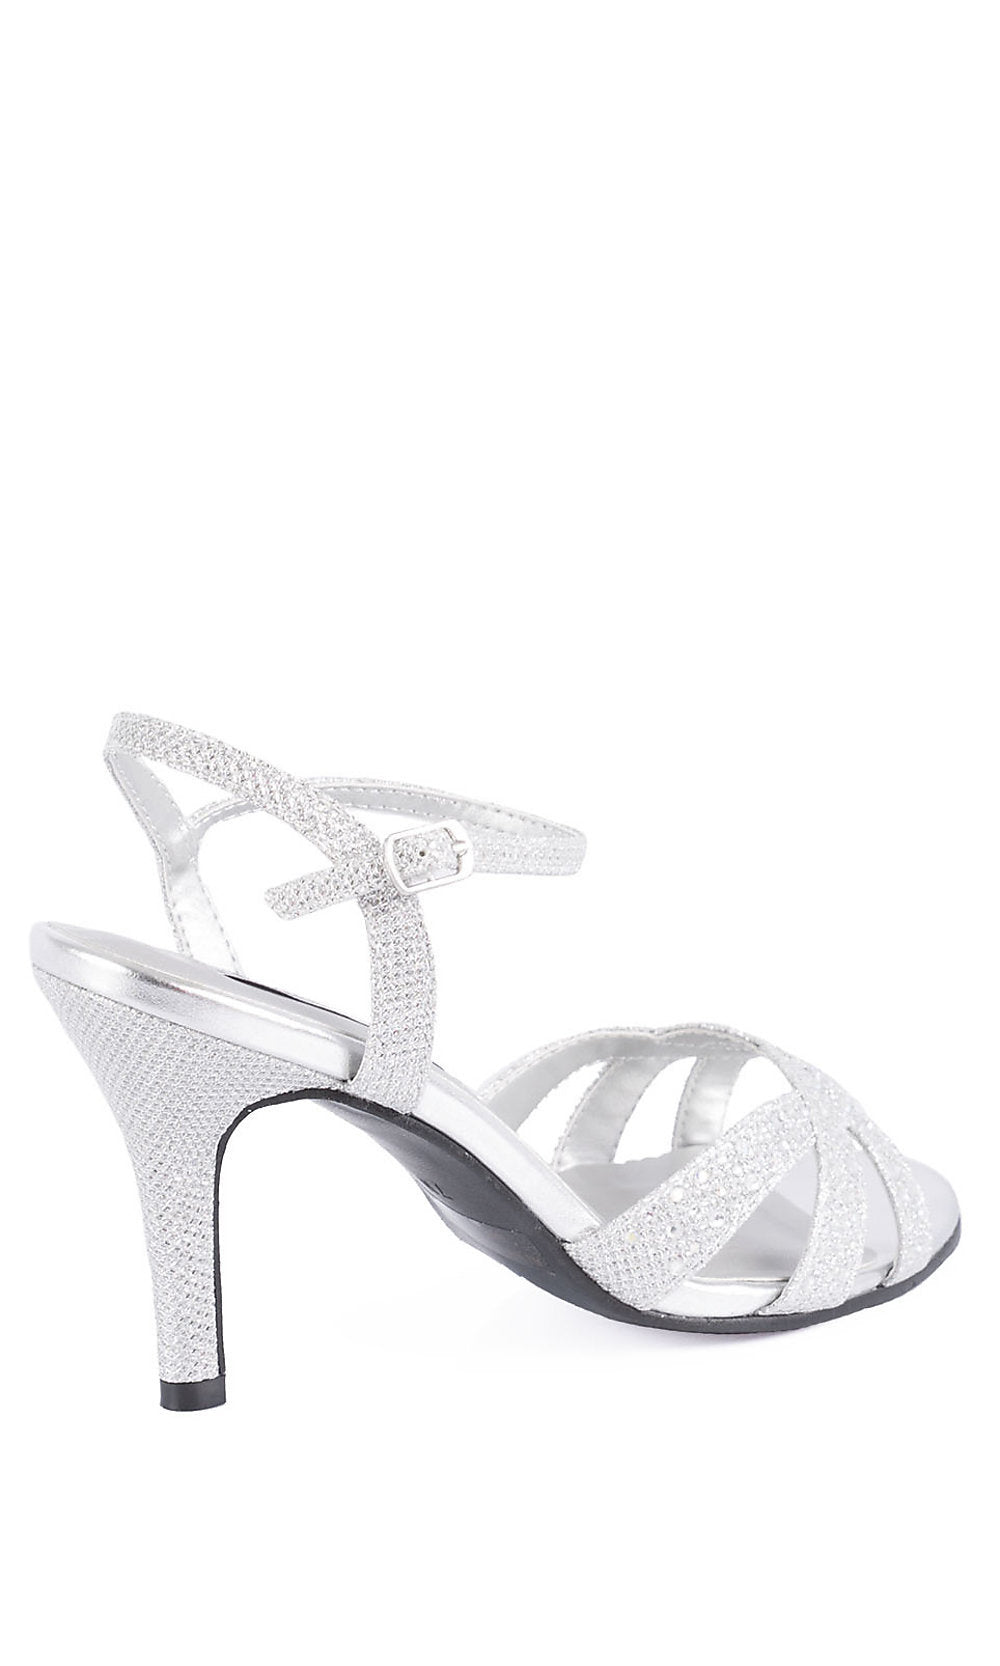 Silver Prom Shoes, Sexy Silver High Heels - PromGirl